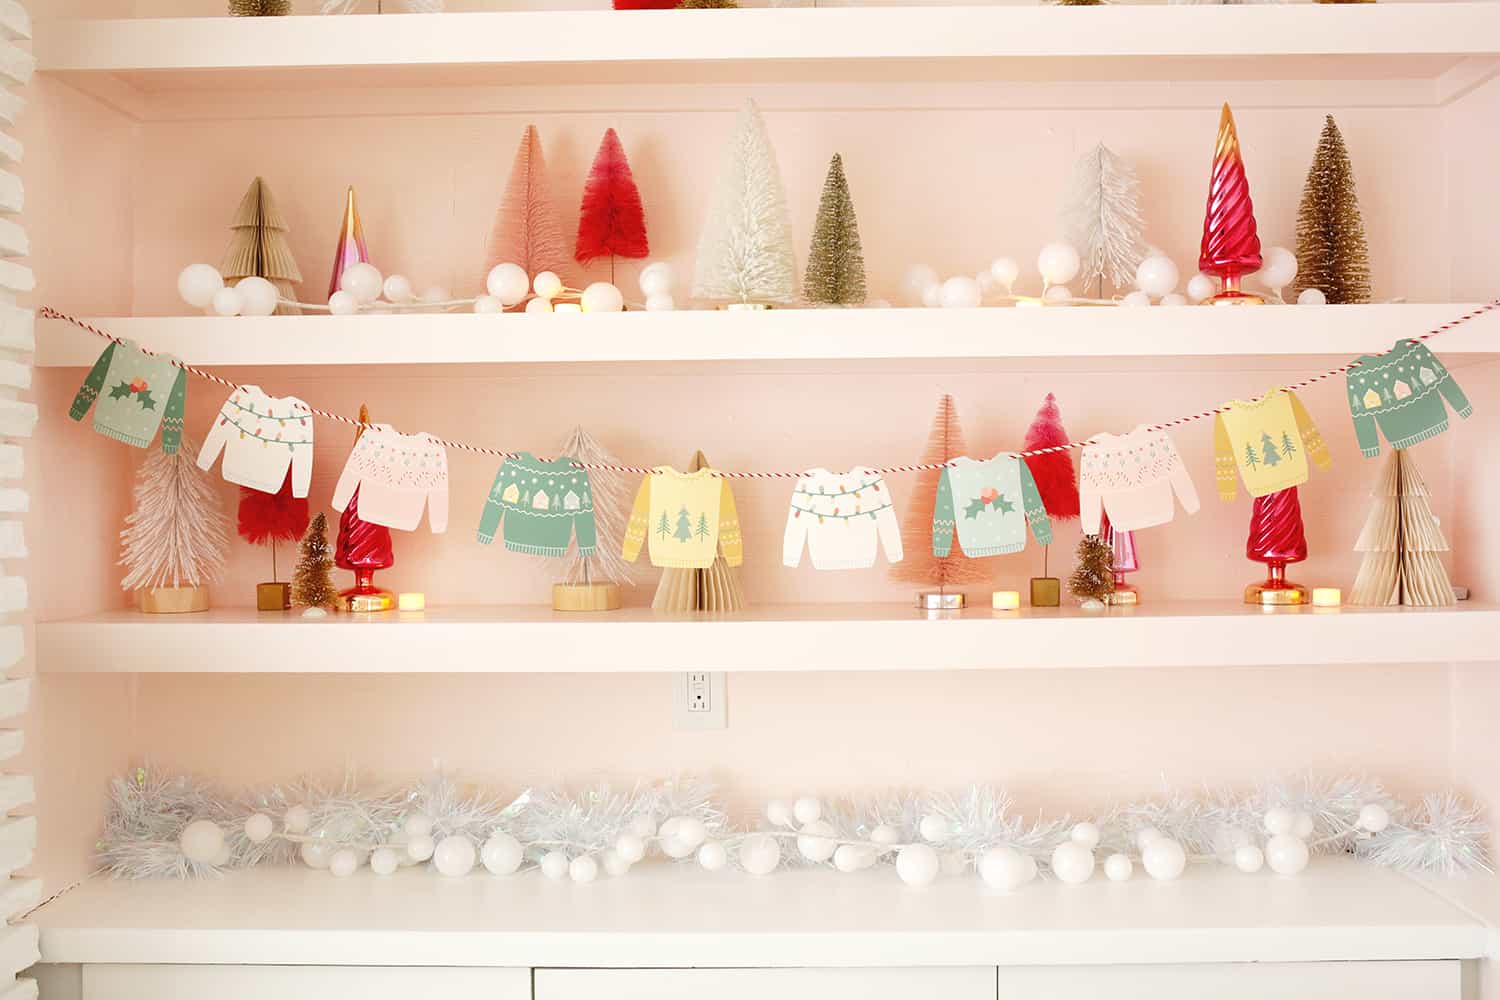 Paper Christmas sweaters strung on a garland with Christmas tree shelf decor